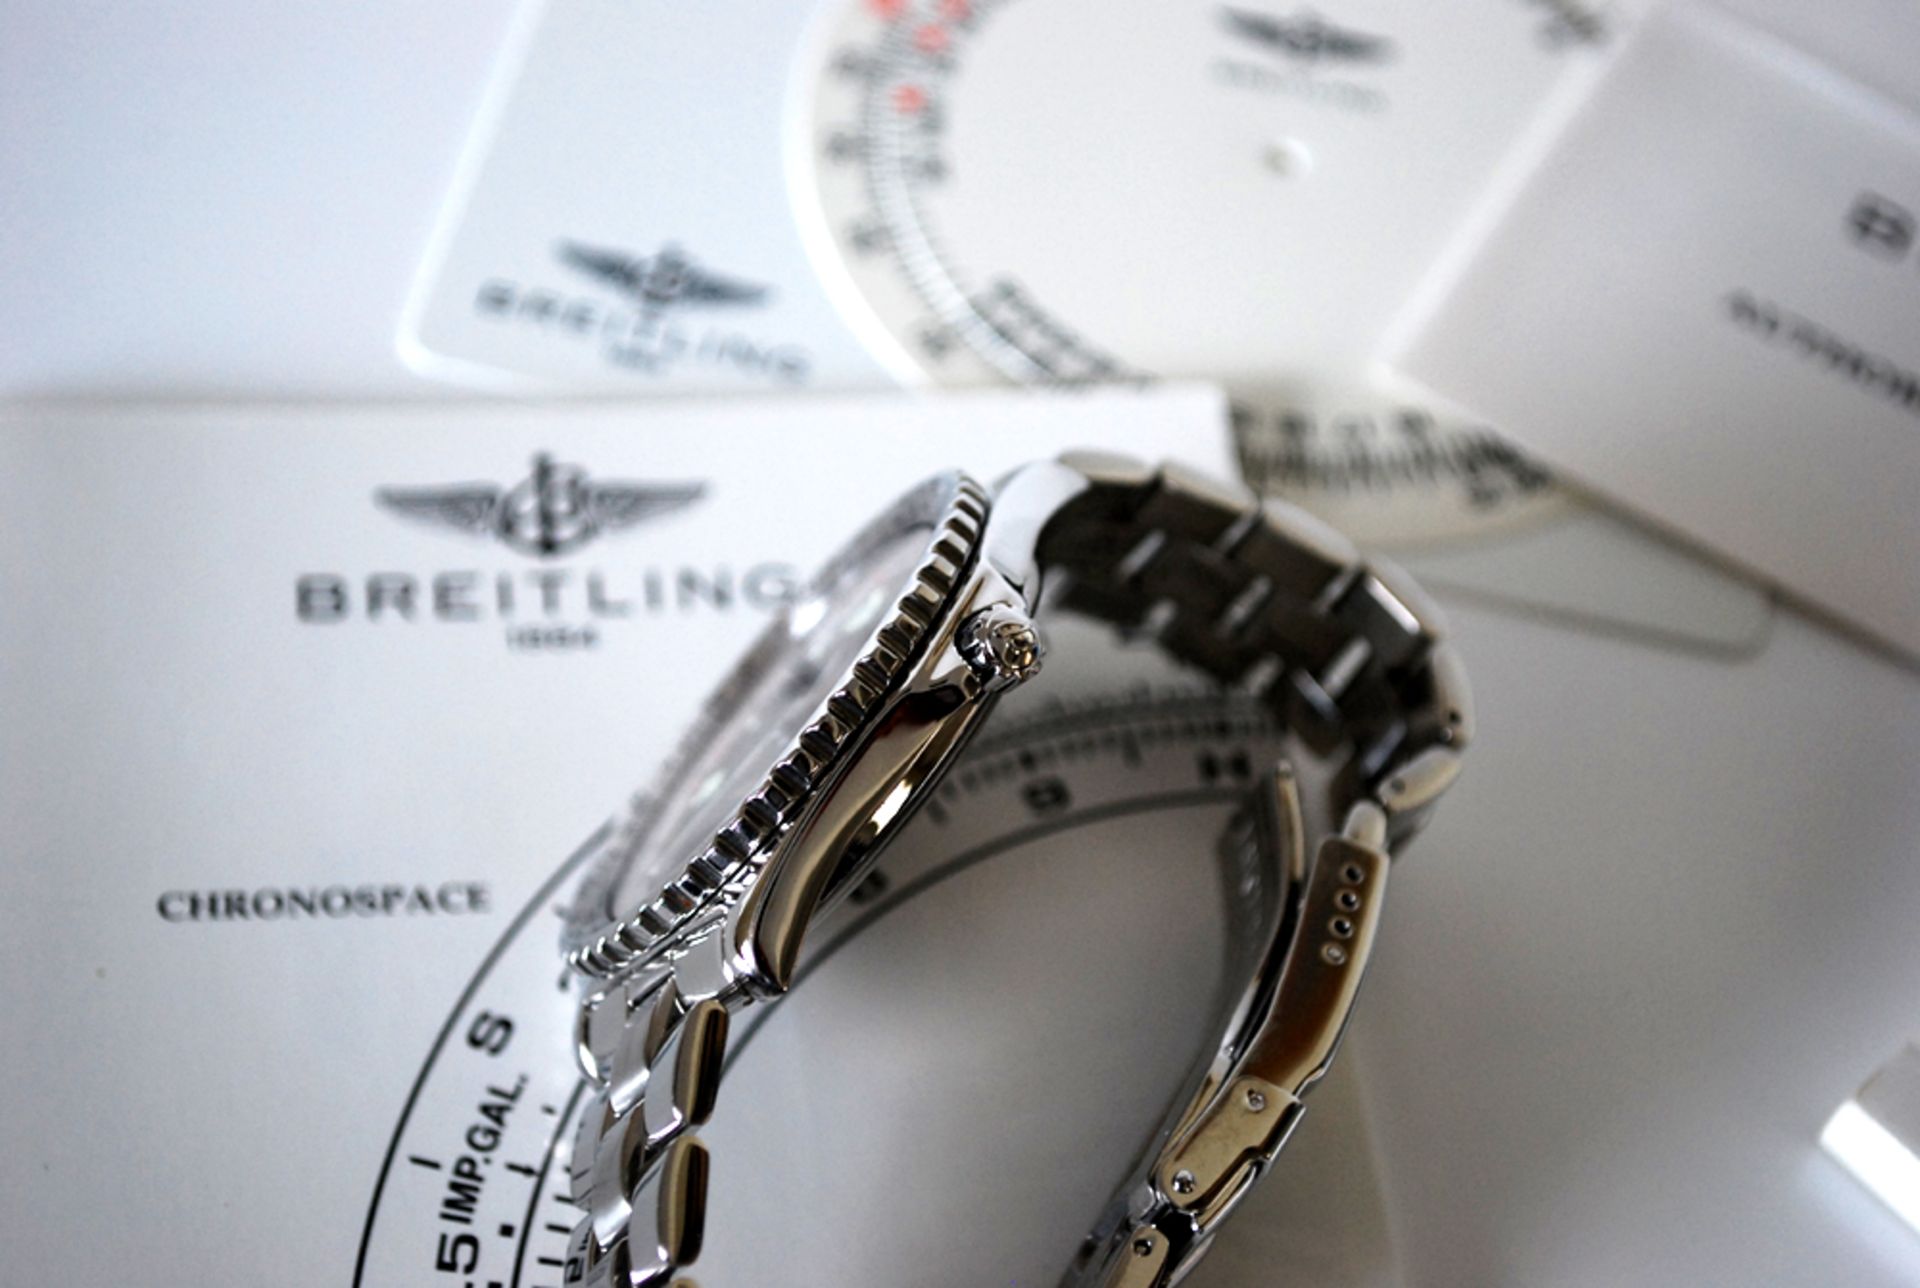 BREITLING – NAVITIMER CHRONOSPACE A56011 (PROFESSIONAL SERIES) - Image 5 of 10